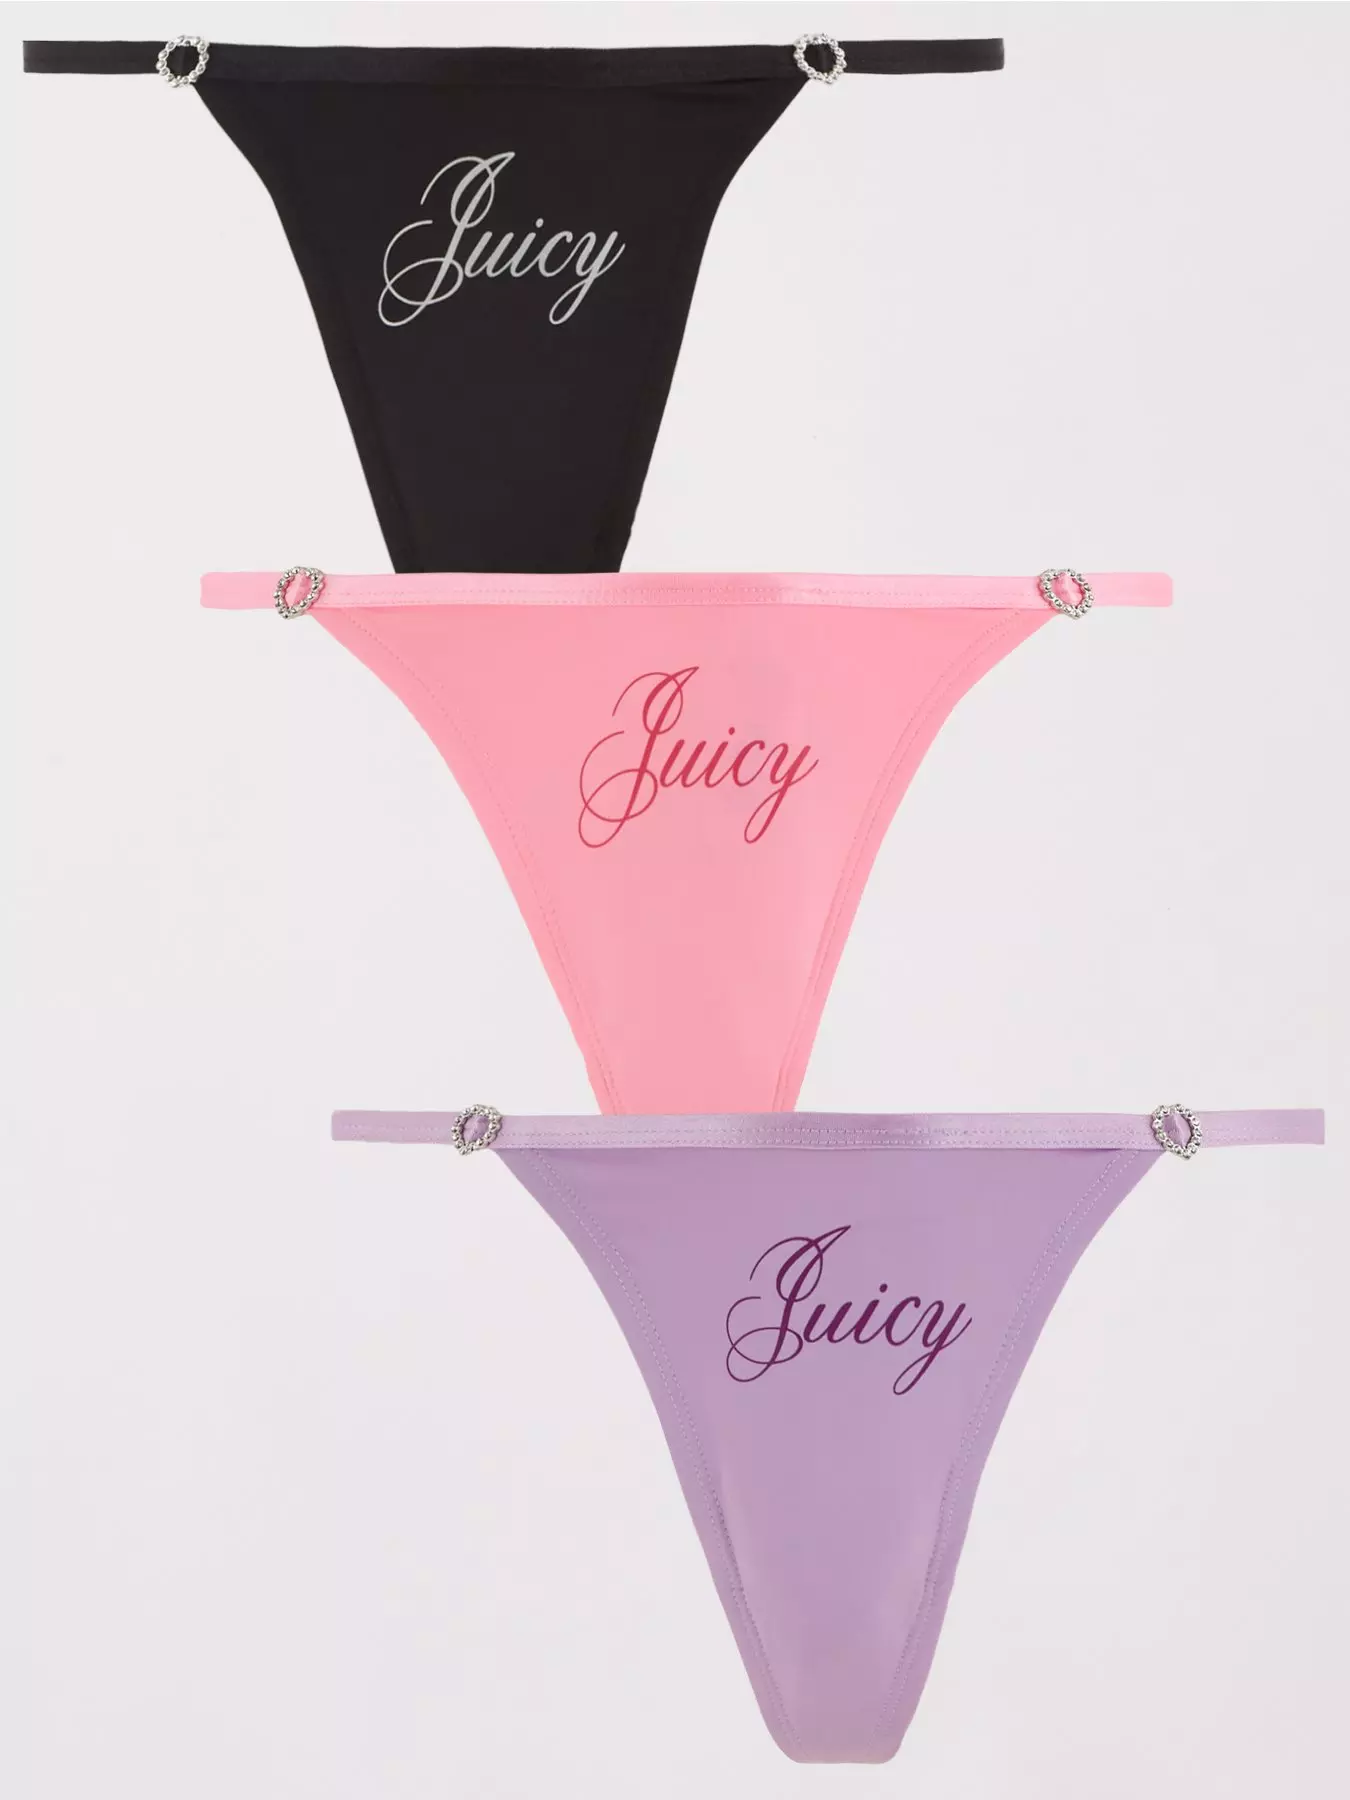 LEOPARD PRINT SATIN T-BAR CHARM THONG – Juicy Couture UK